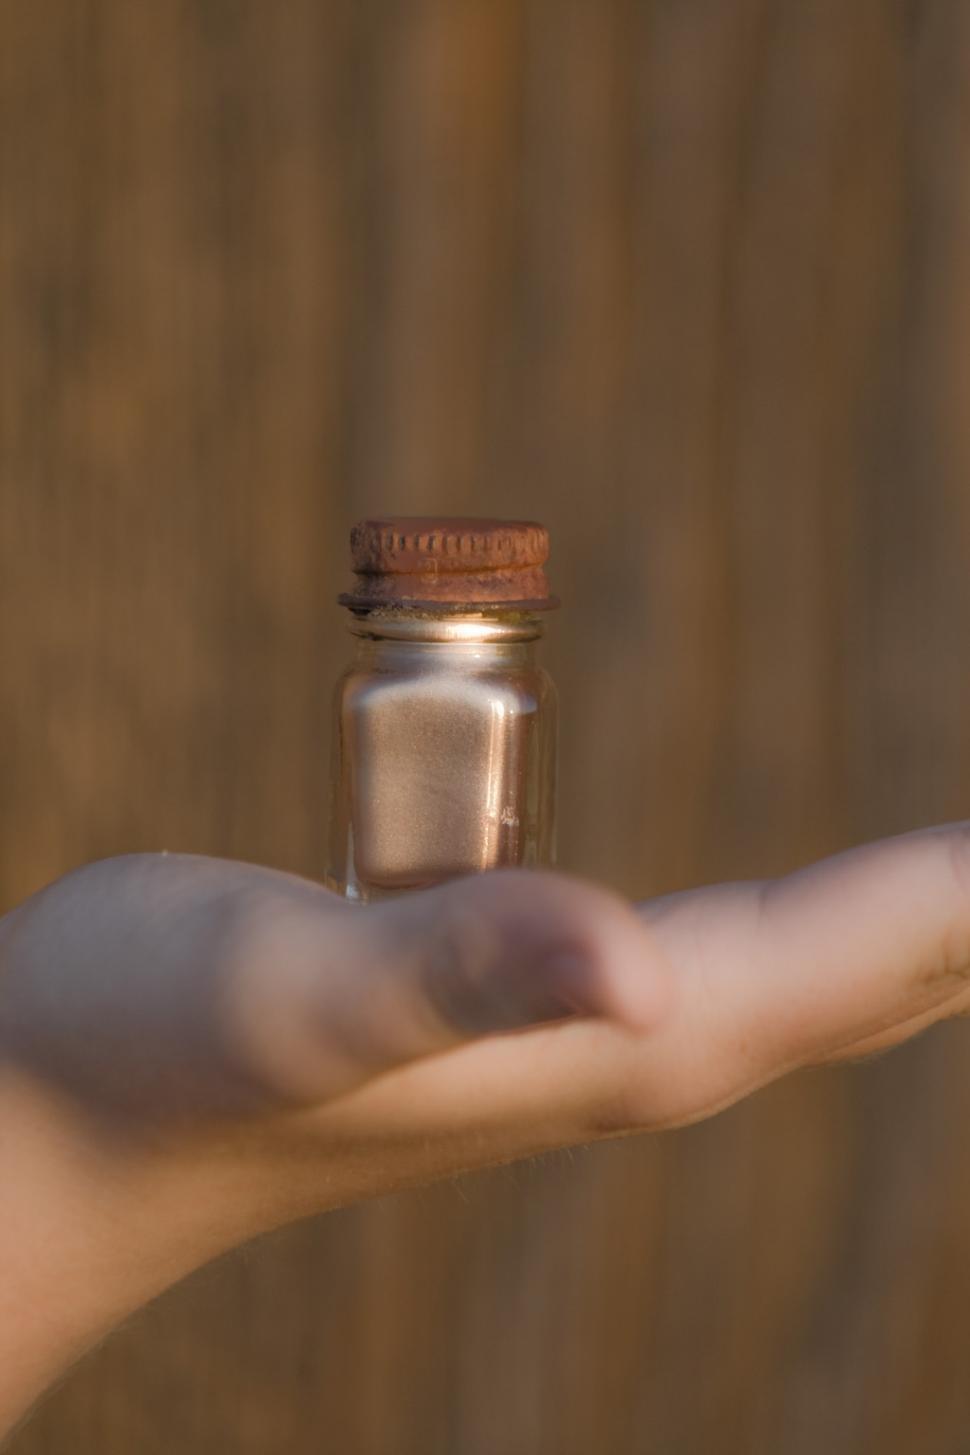 Free Image of Person Holding Small Jar in Hand 